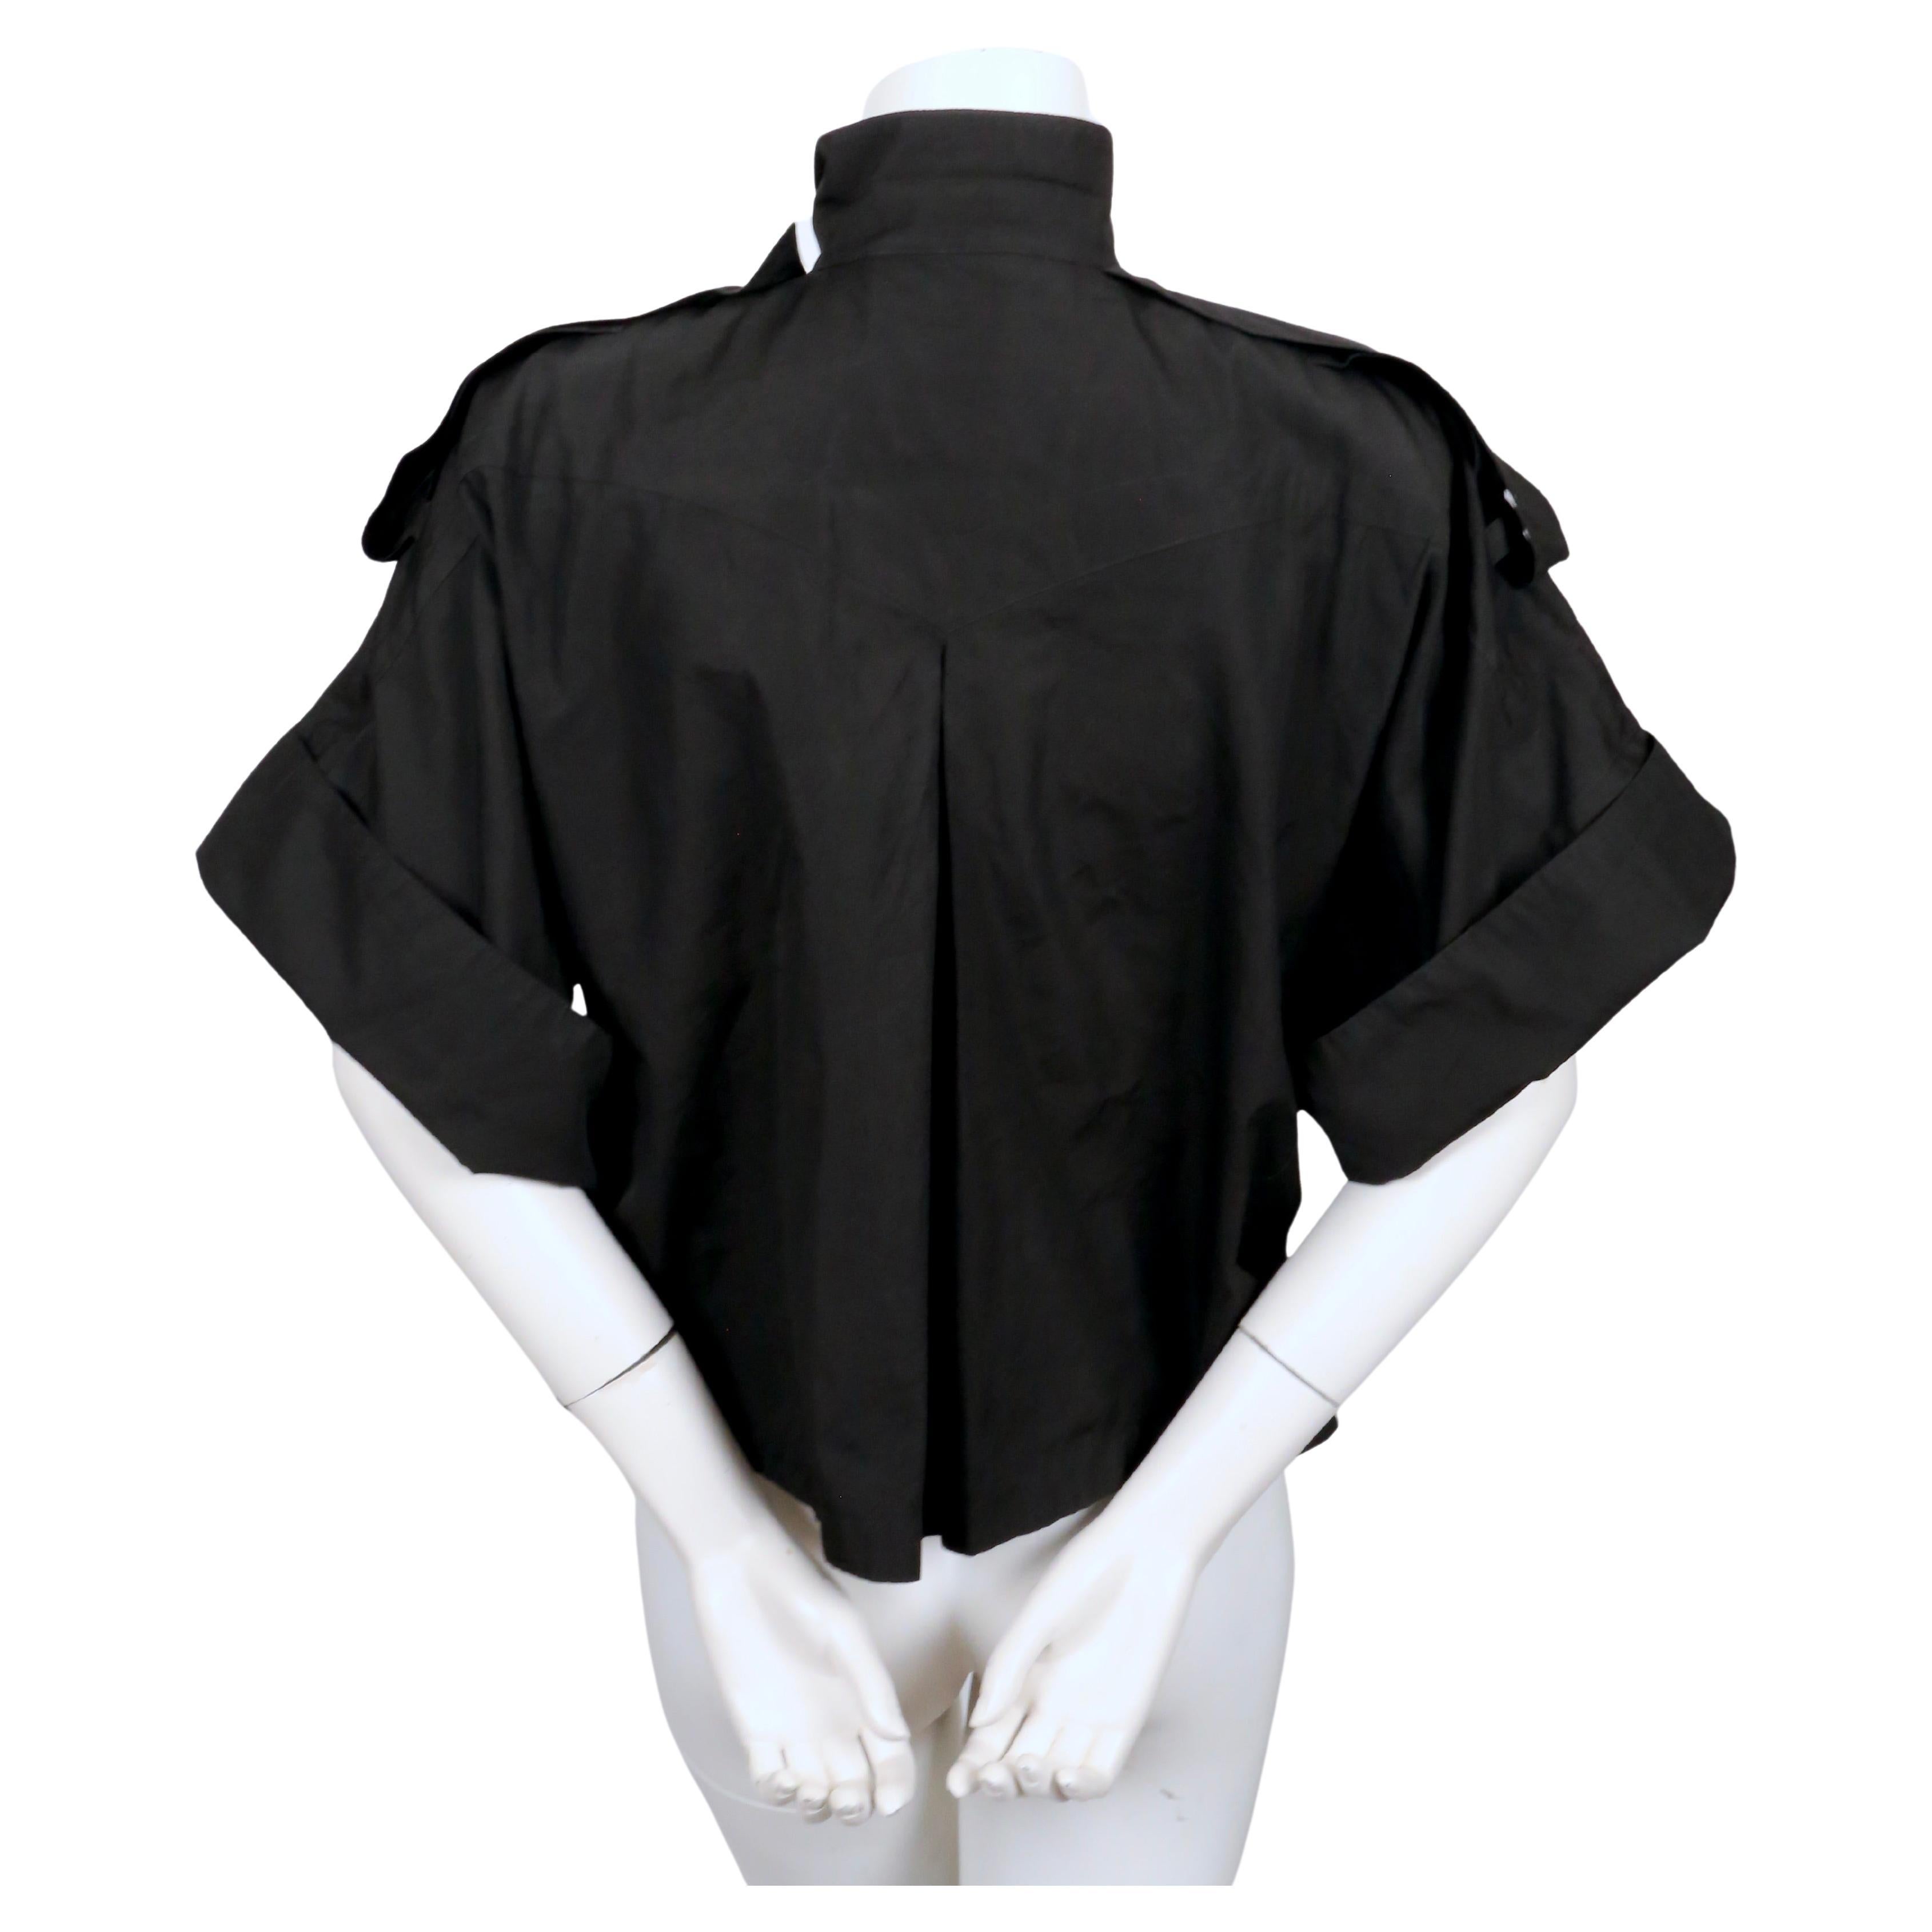 1980's CLAUDE MONTANA cropped black cotton shirt jacket with short sleeves 1